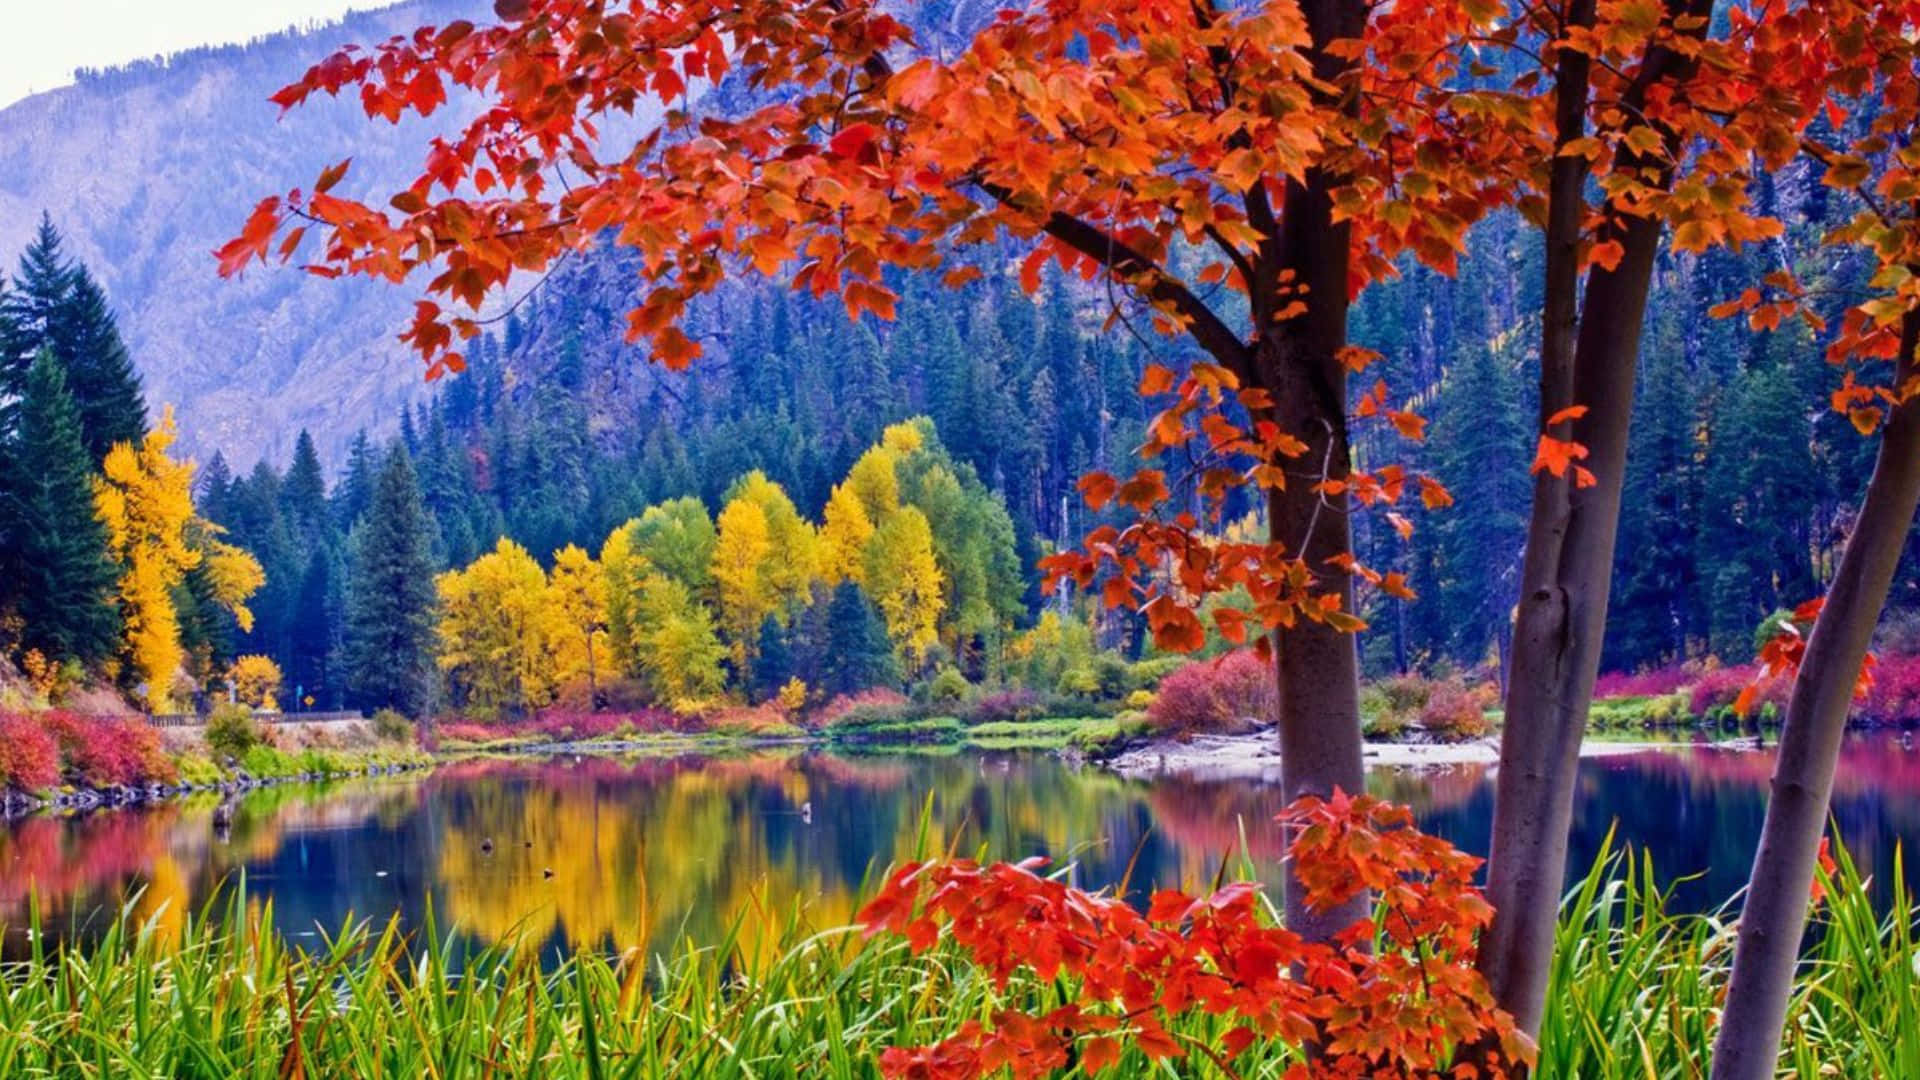 Download Stunning Fall Foliage Scenery Wallpaper | Wallpapers.com